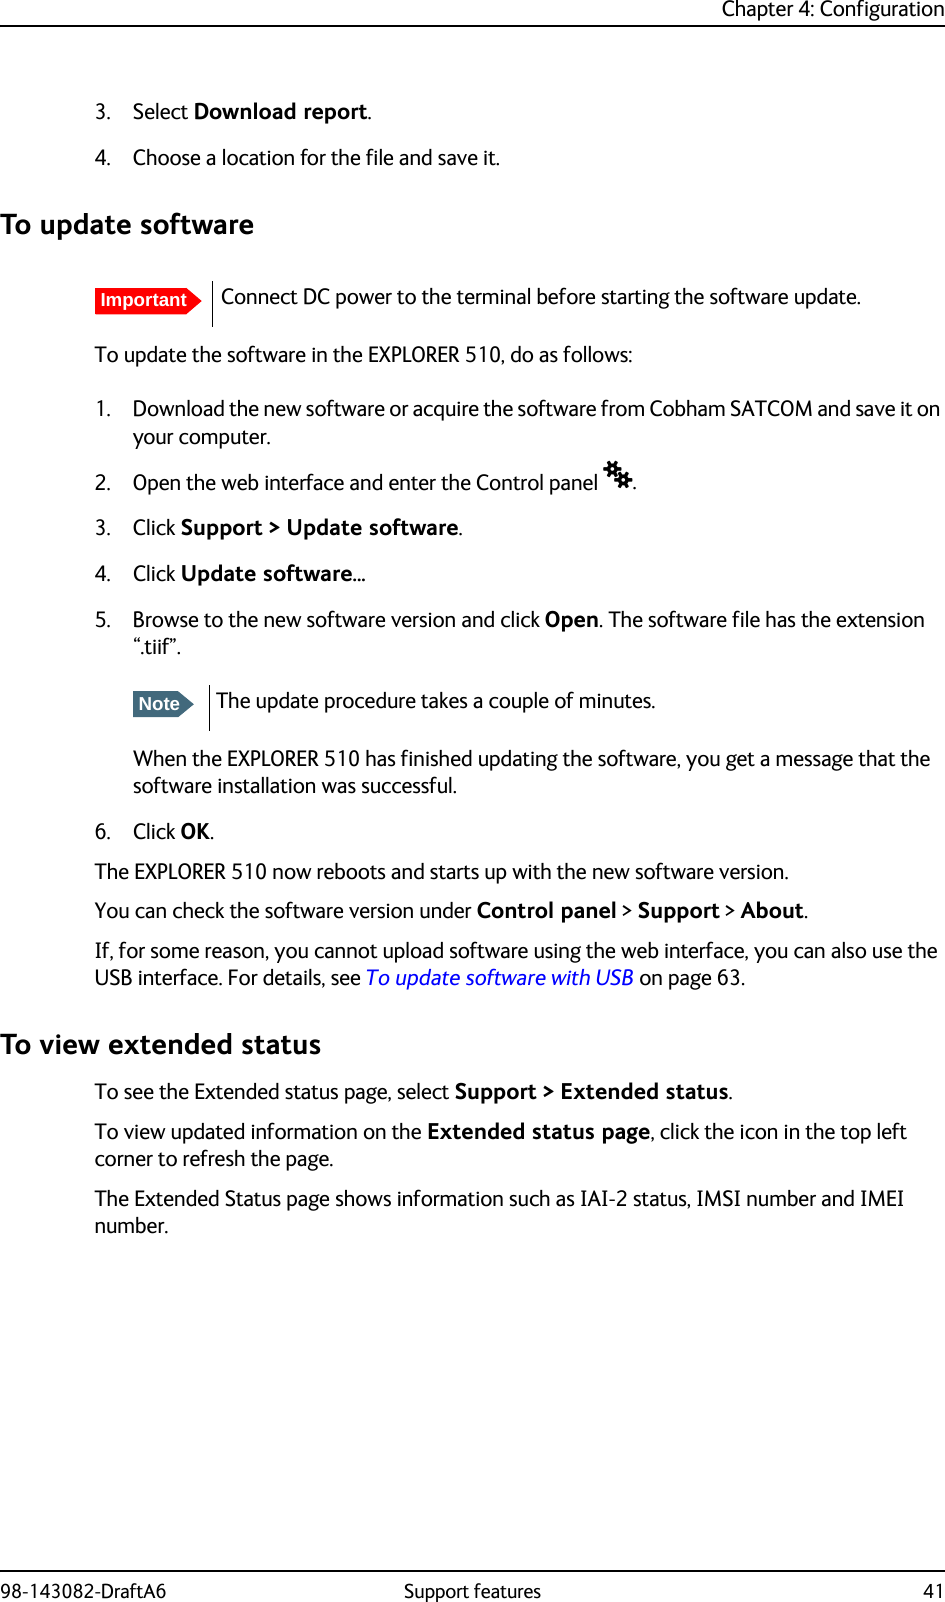 Chapter 4: Configuration98-143082-DraftA6 Support features 413. Select Download report.4. Choose a location for the file and save it.To update softwareTo update the software in the EXPLORER 510, do as follows:1. Download the new software or acquire the software from Cobham SATCOM and save it on your computer.2. Open the web interface and enter the Control panel .3. Click Support &gt; Update software.4. Click Update software... 5. Browse to the new software version and click Open. The software file has the extension “.tiif”.When the EXPLORER 510 has finished updating the software, you get a message that the software installation was successful. 6. Click OK.The EXPLORER 510 now reboots and starts up with the new software version.You can check the software version under Control panel &gt; Support &gt; About.If, for some reason, you cannot upload software using the web interface, you can also use the USB interface. For details, see To update software with USB on page 63.To view extended statusTo see the Extended status page, select Support &gt; Extended status.To view updated information on the Extended status page, click the icon in the top left corner to refresh the page.The Extended Status page shows information such as IAI-2 status, IMSI number and IMEI number.ImportantConnect DC power to the terminal before starting the software update.NoteThe update procedure takes a couple of minutes.